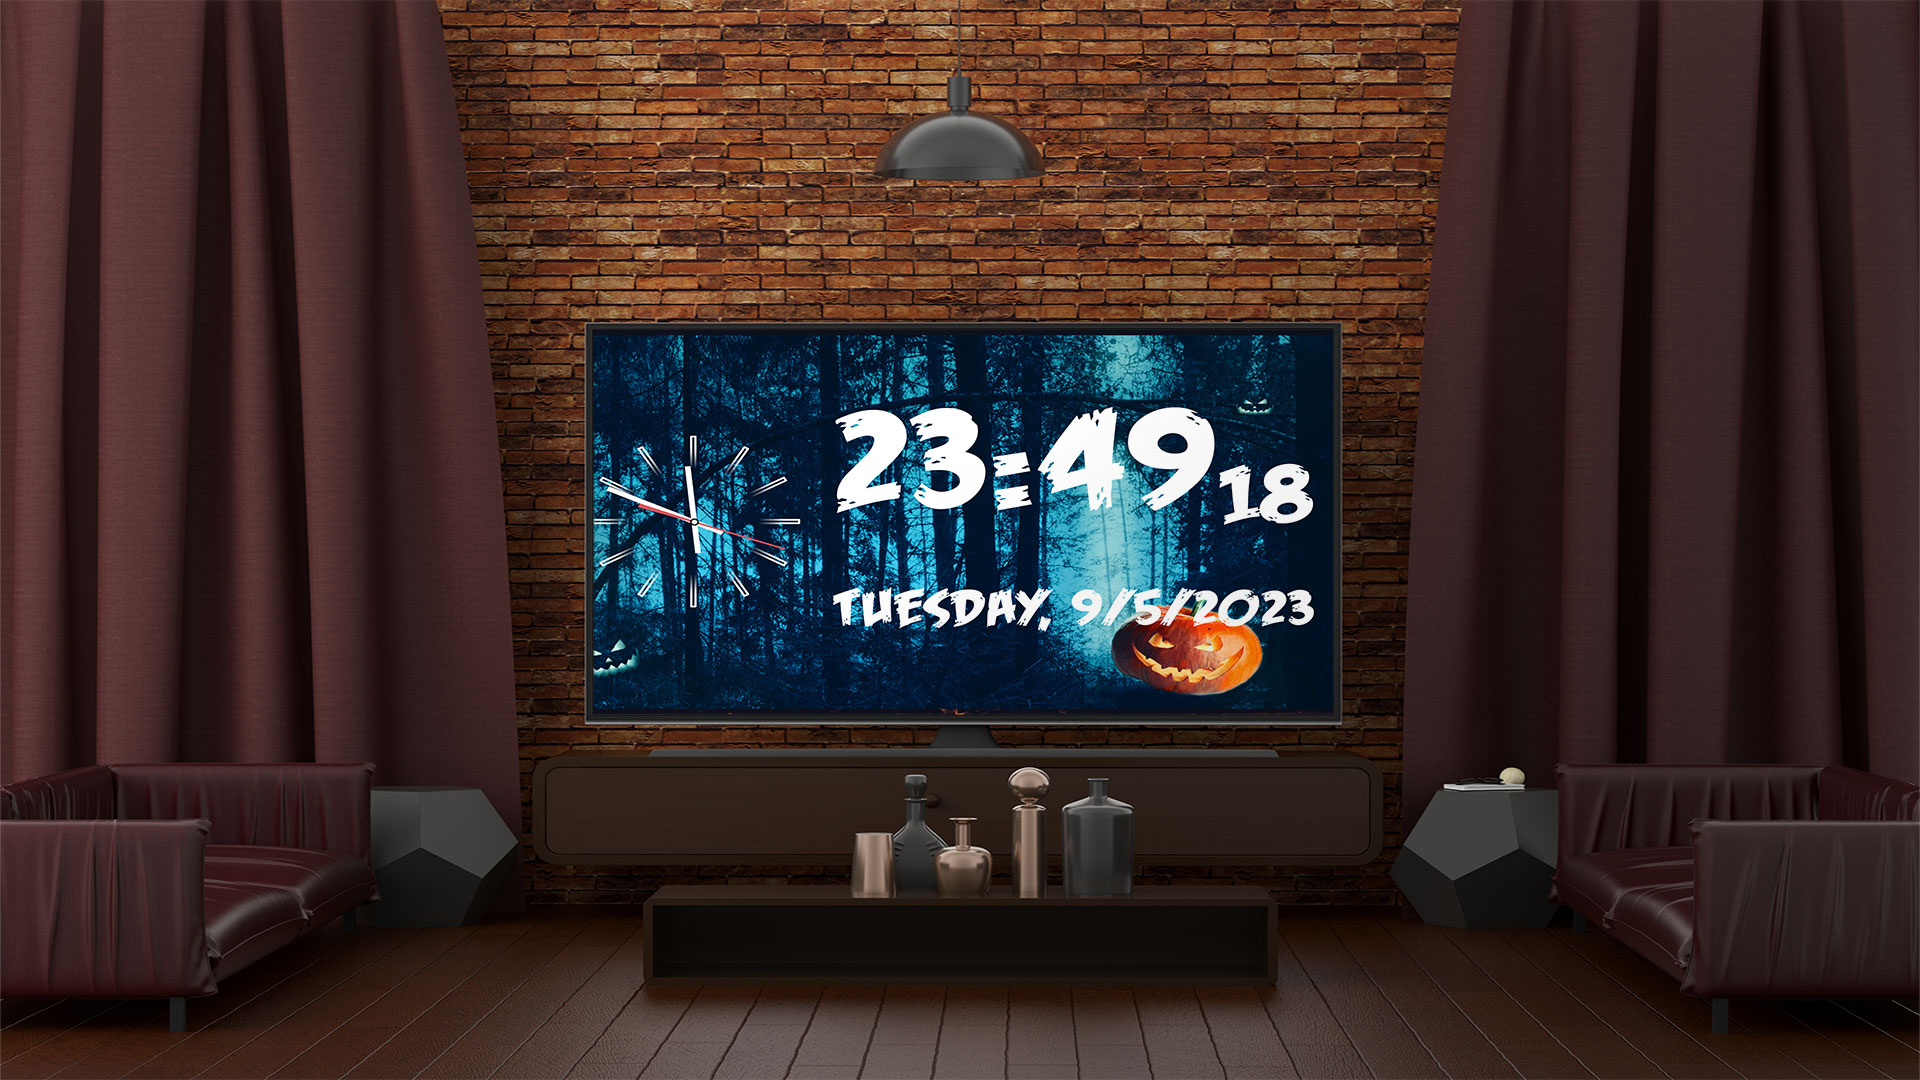 Halloween 🎃 Spooky Ambience Screensaver UHD: Halloween Spooky Ambience Wallpaper Screensaver Analog And Digital Clock with event manager For Tablets And Fire TVs - NO ADS